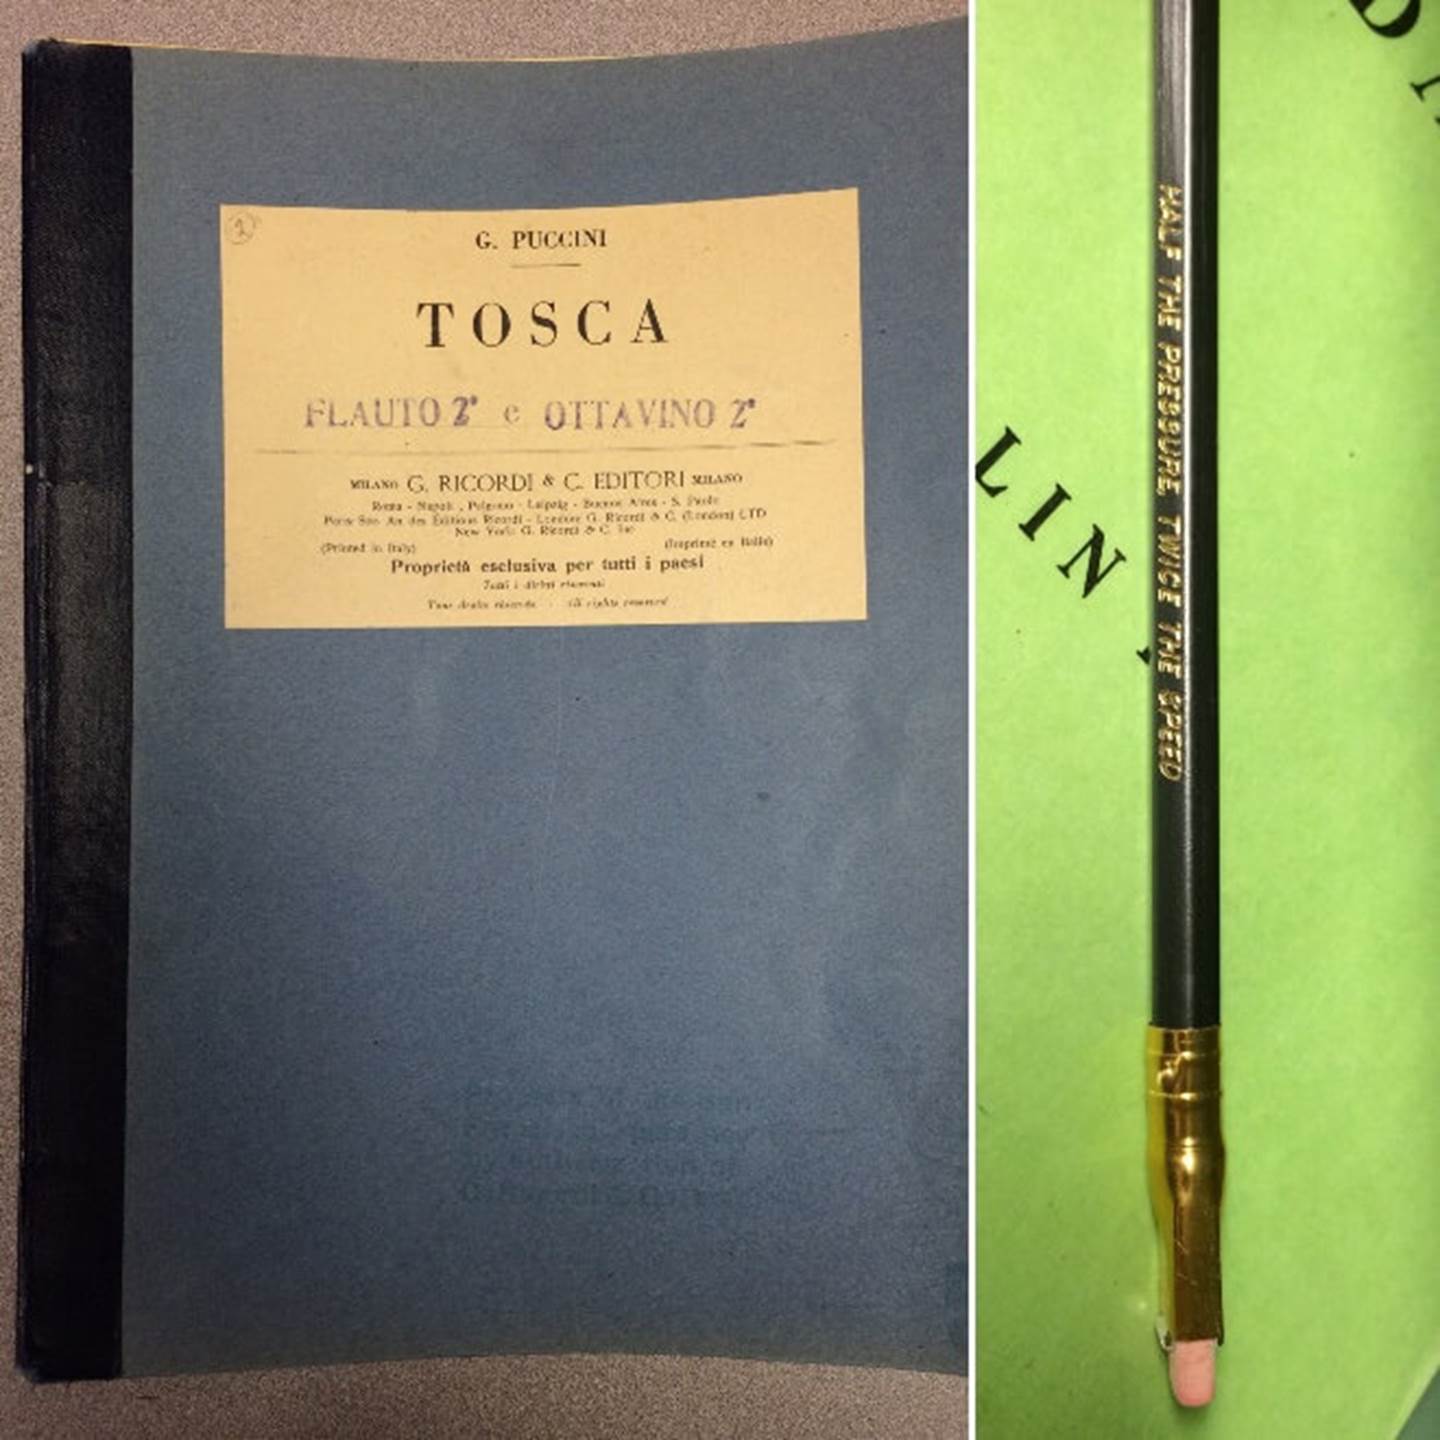 Our 70-year old Tosca parts and one of the highly sought after Blackwing pencils.